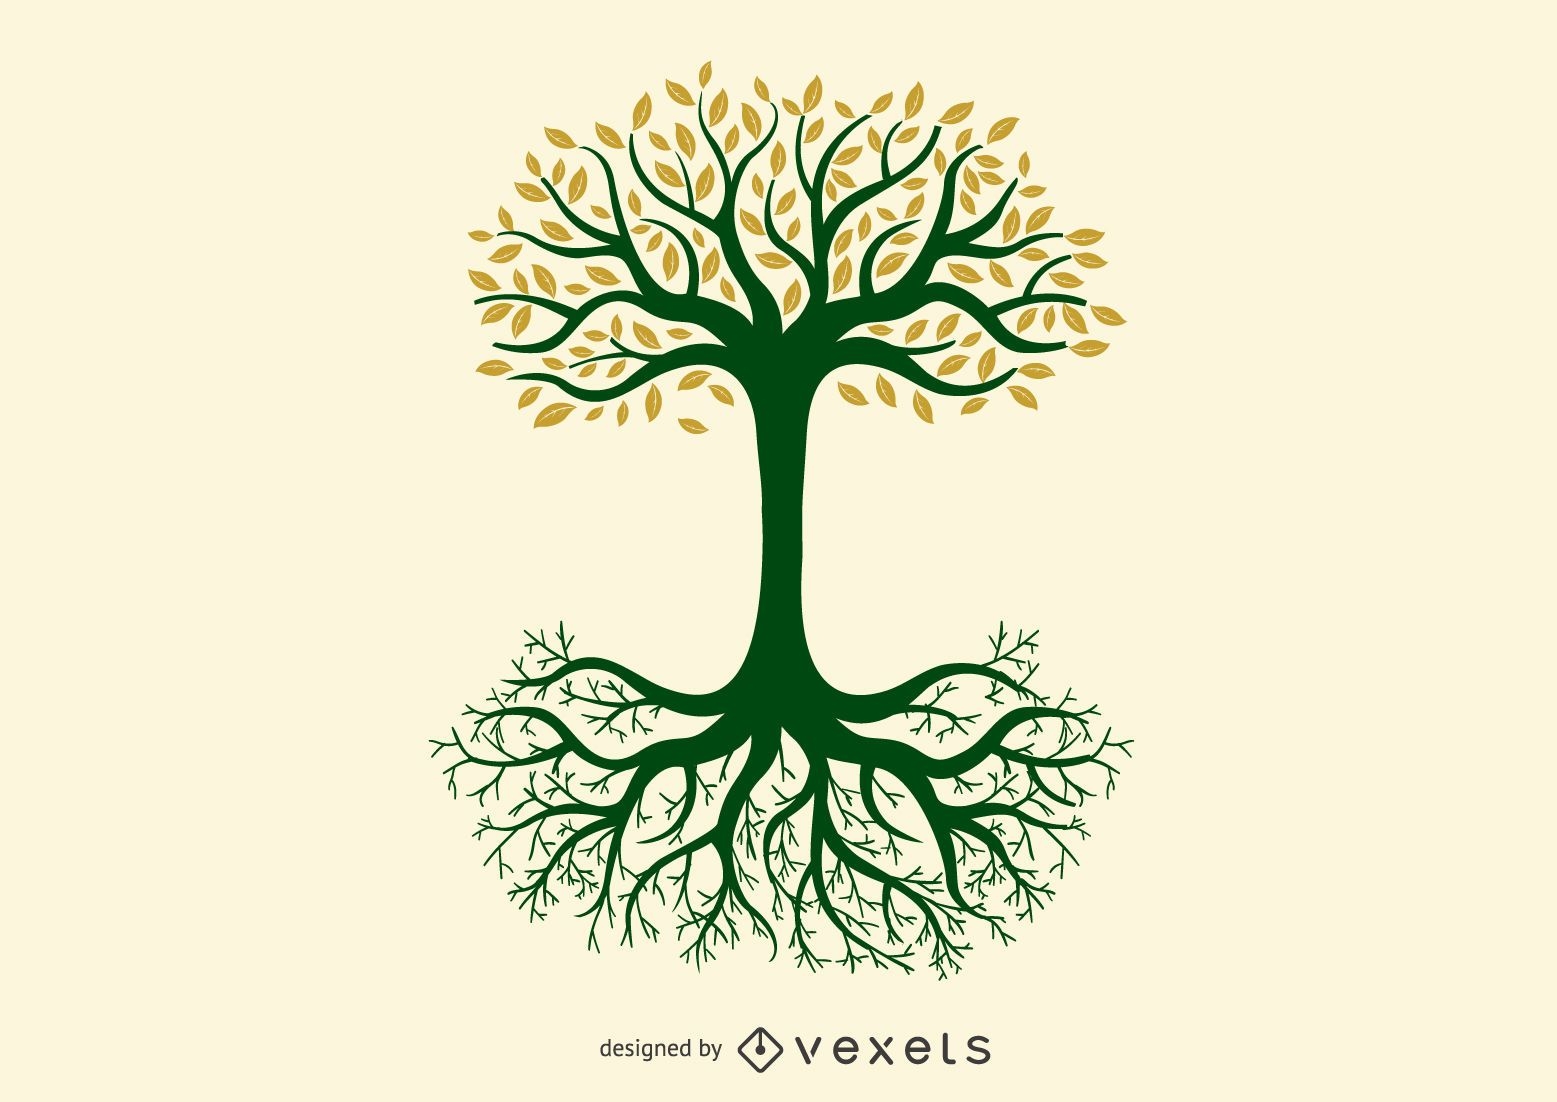 Tree of Life Yggdrasil Norse Design Gr?fico